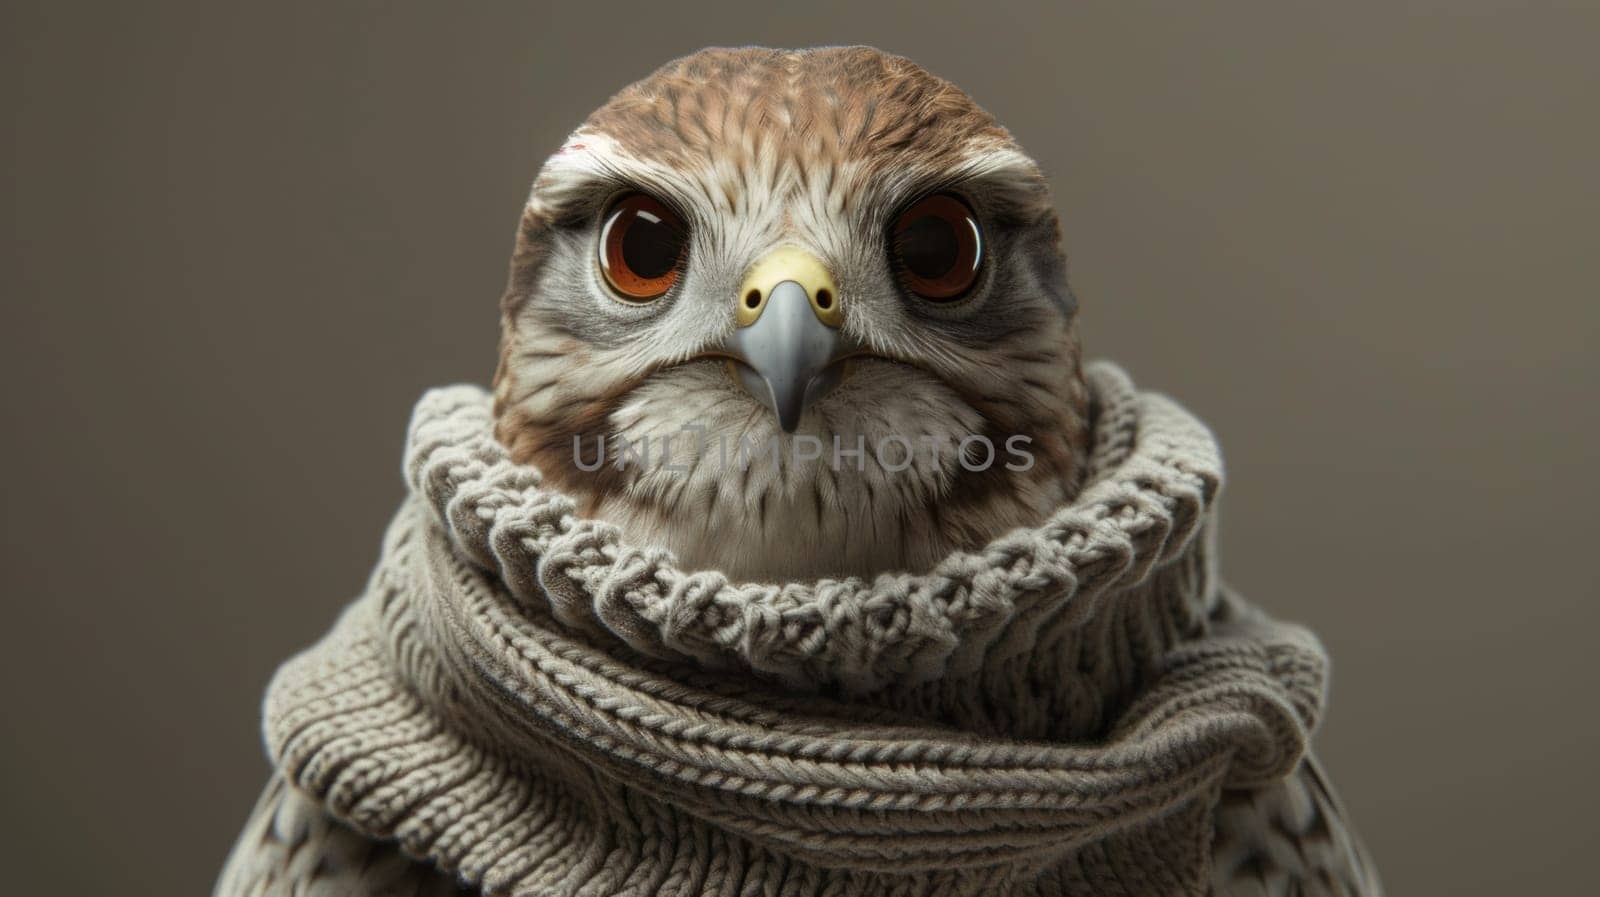 A close up of a bird wearing a sweater and looking at the camera